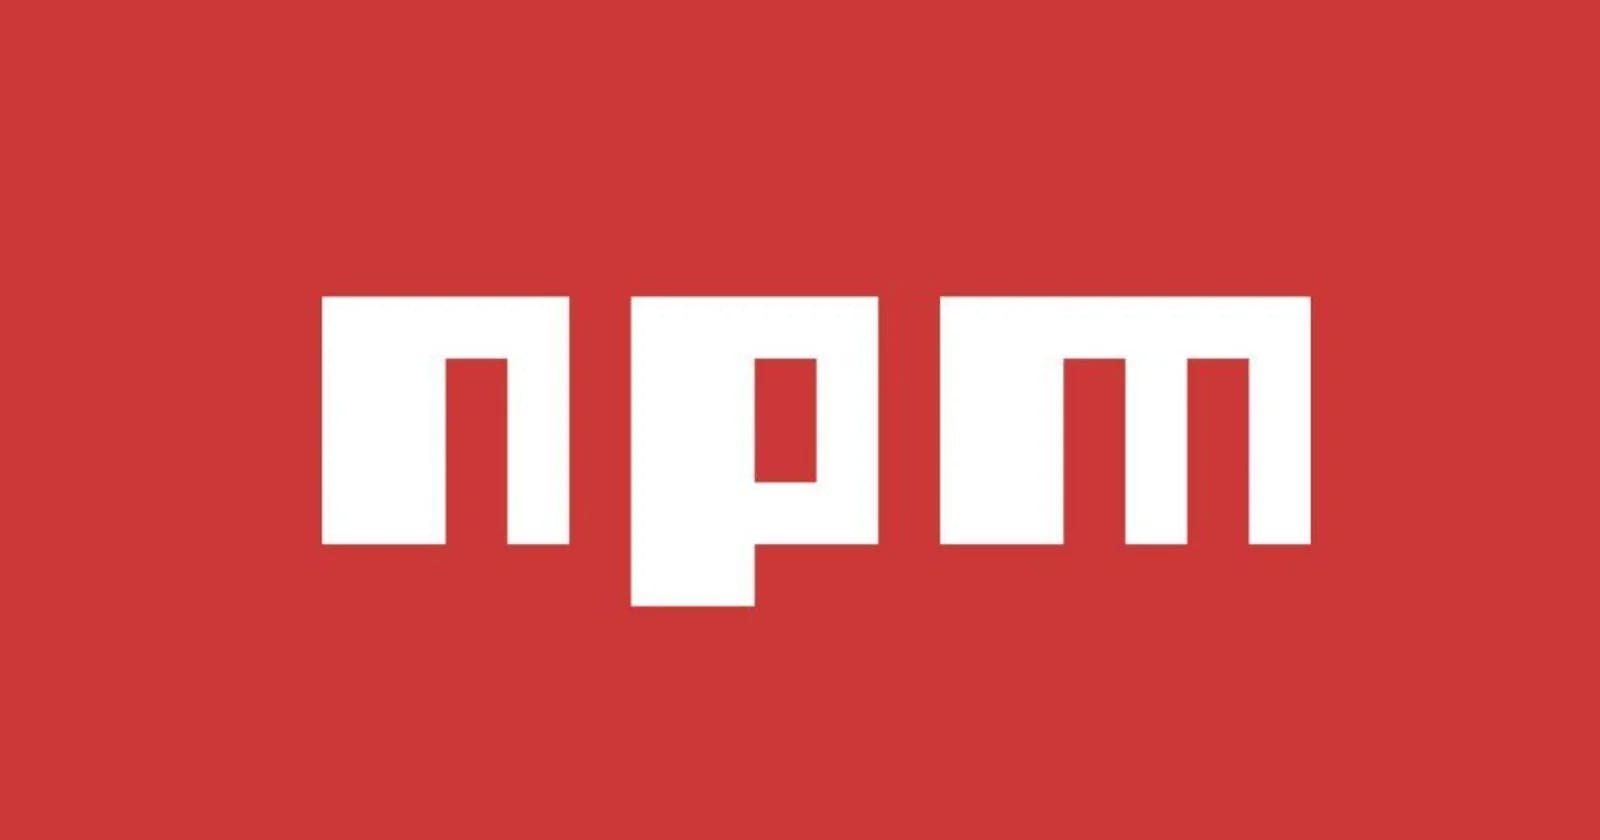 What is npm?